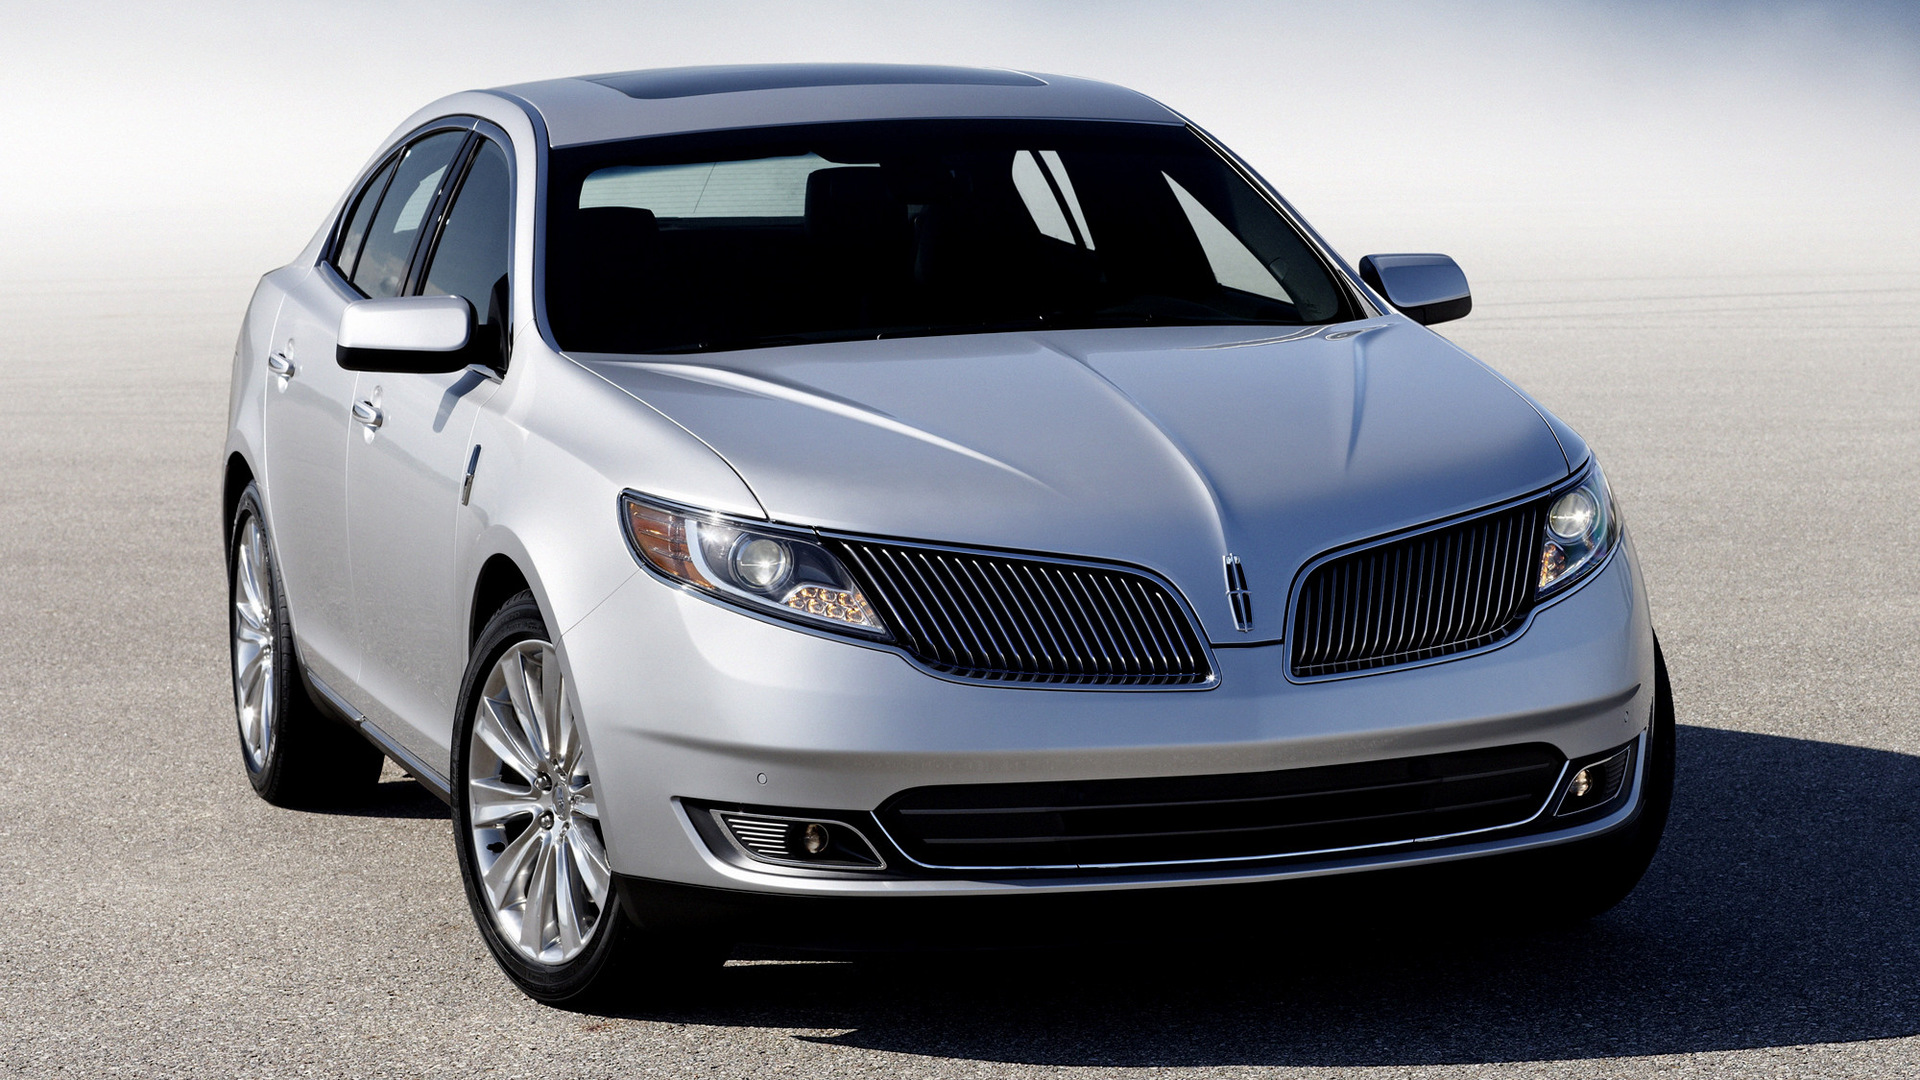 Lincoln MKS (2013) Wallpapers and HD Images - Car Pixel